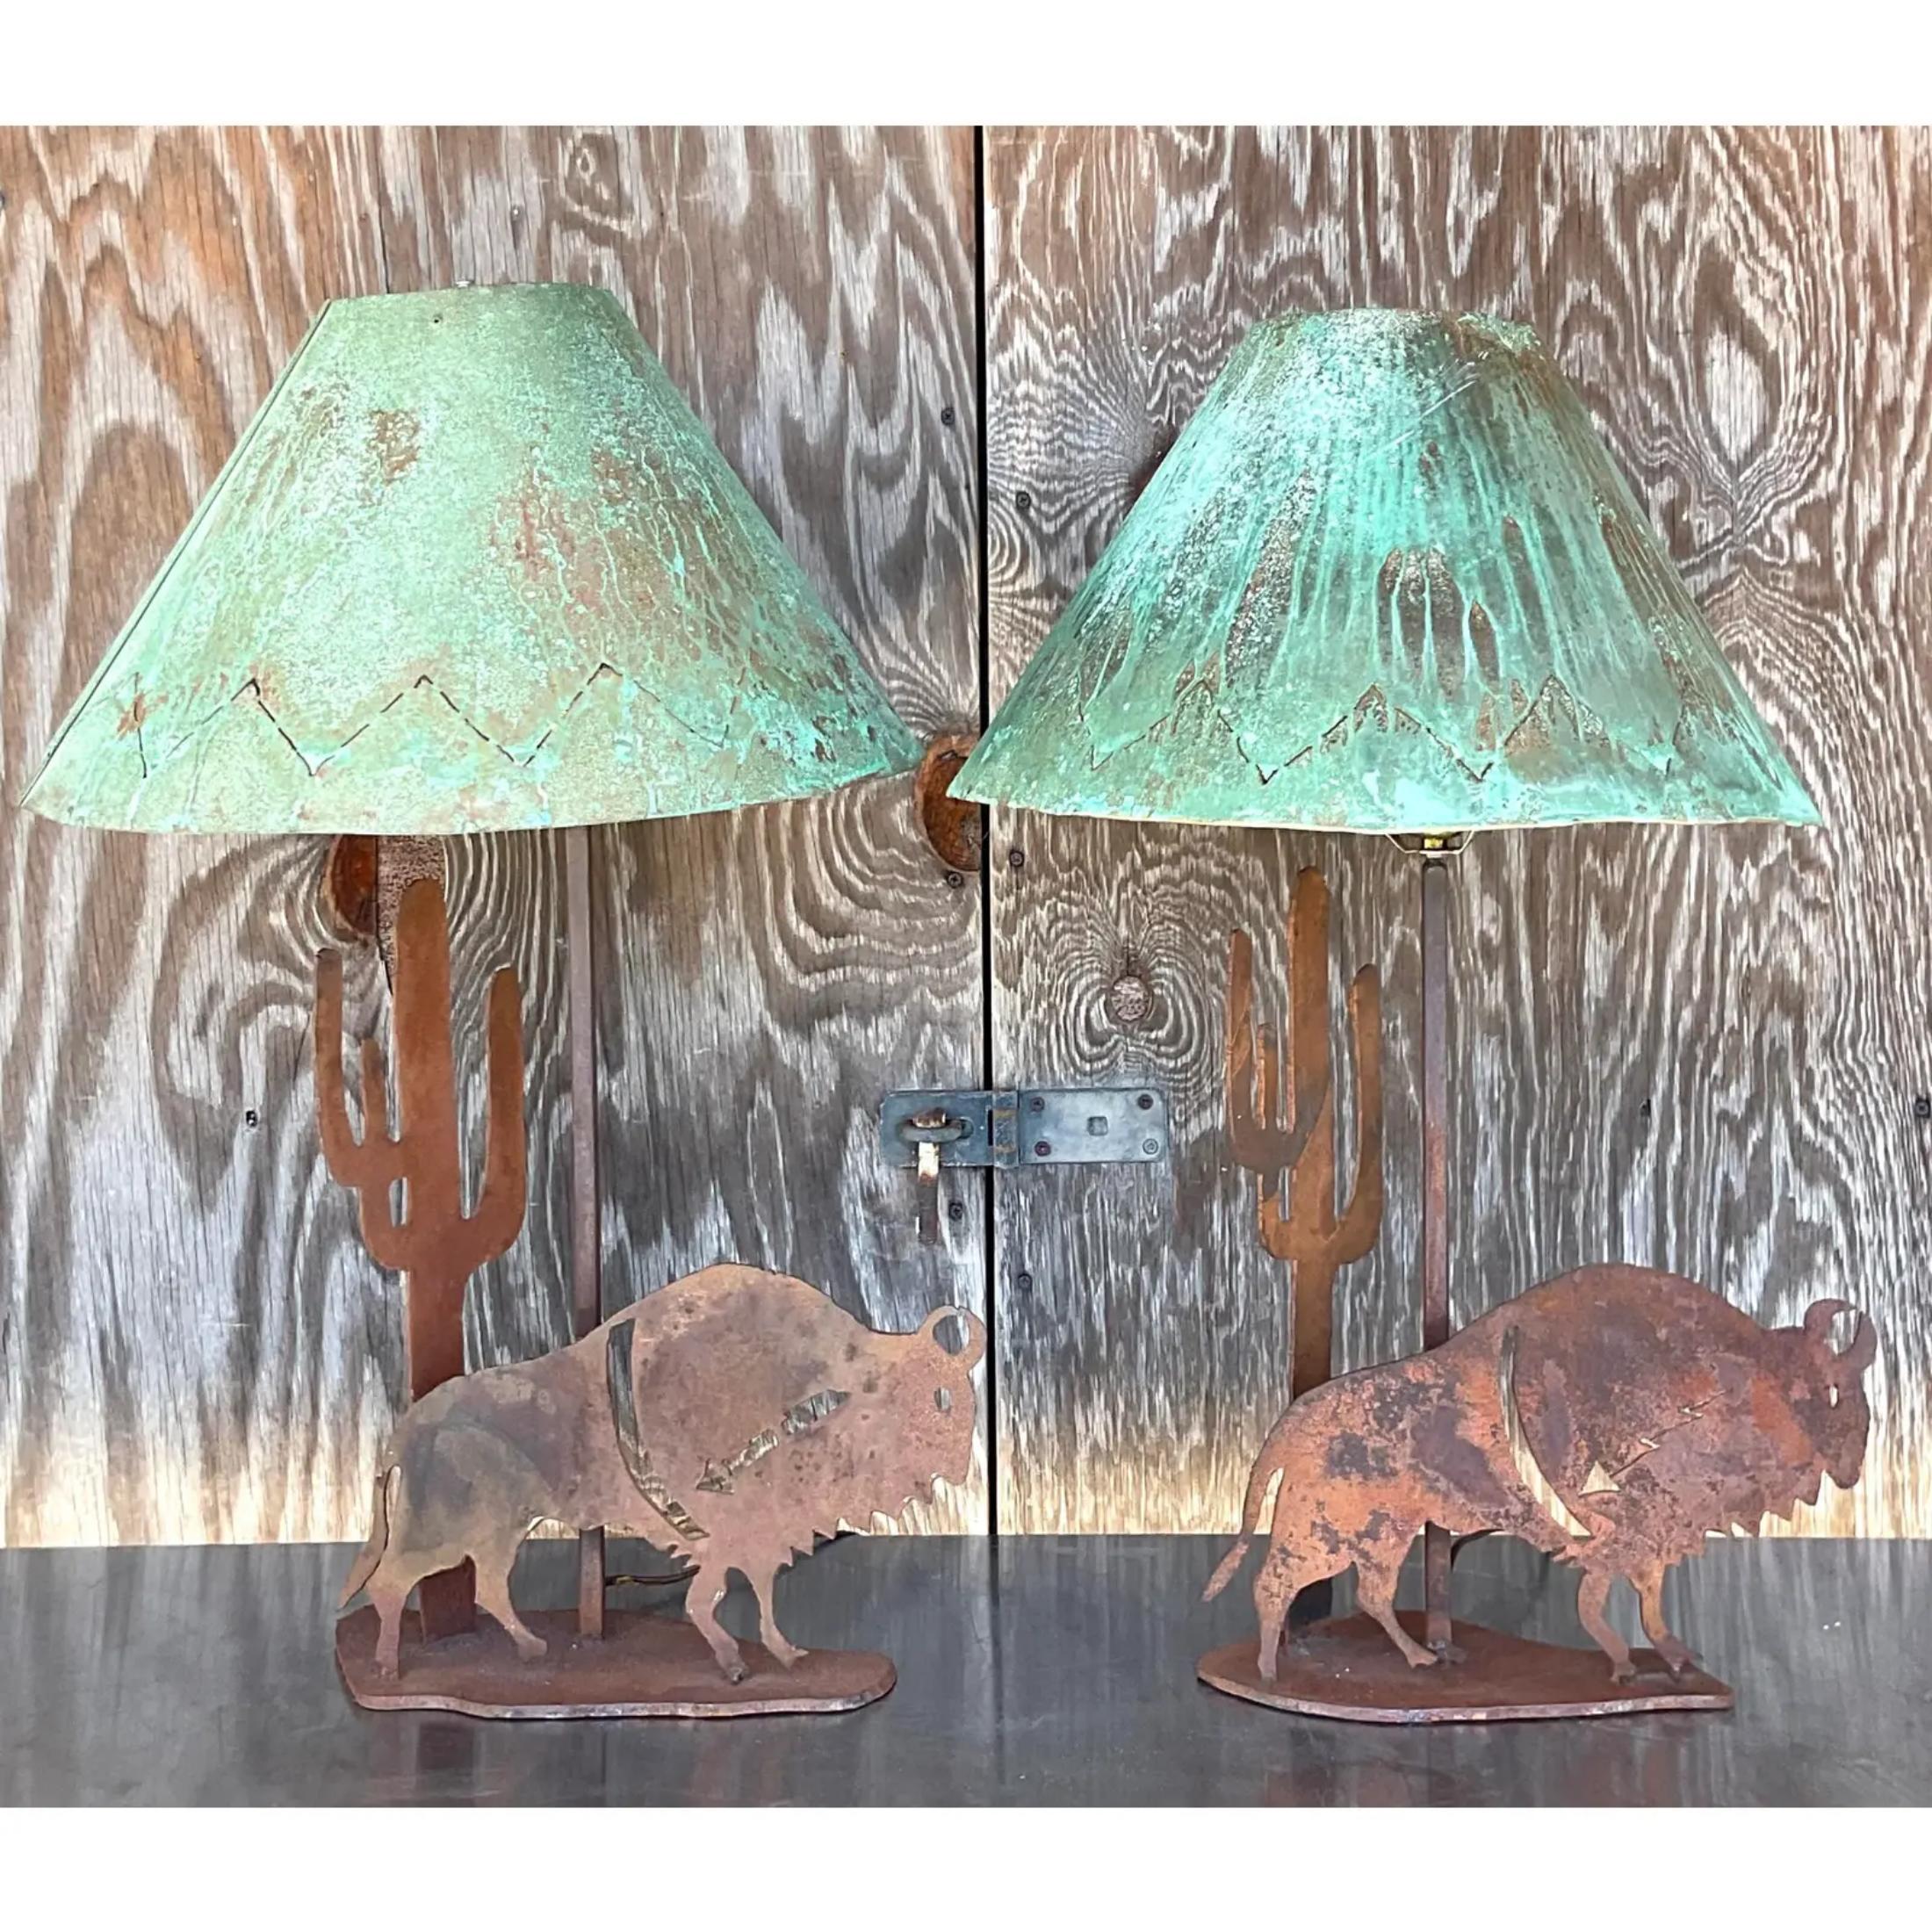 Vintage Rustic Punch Cut Lamps With Patinated Metal Shades - a Pair 2